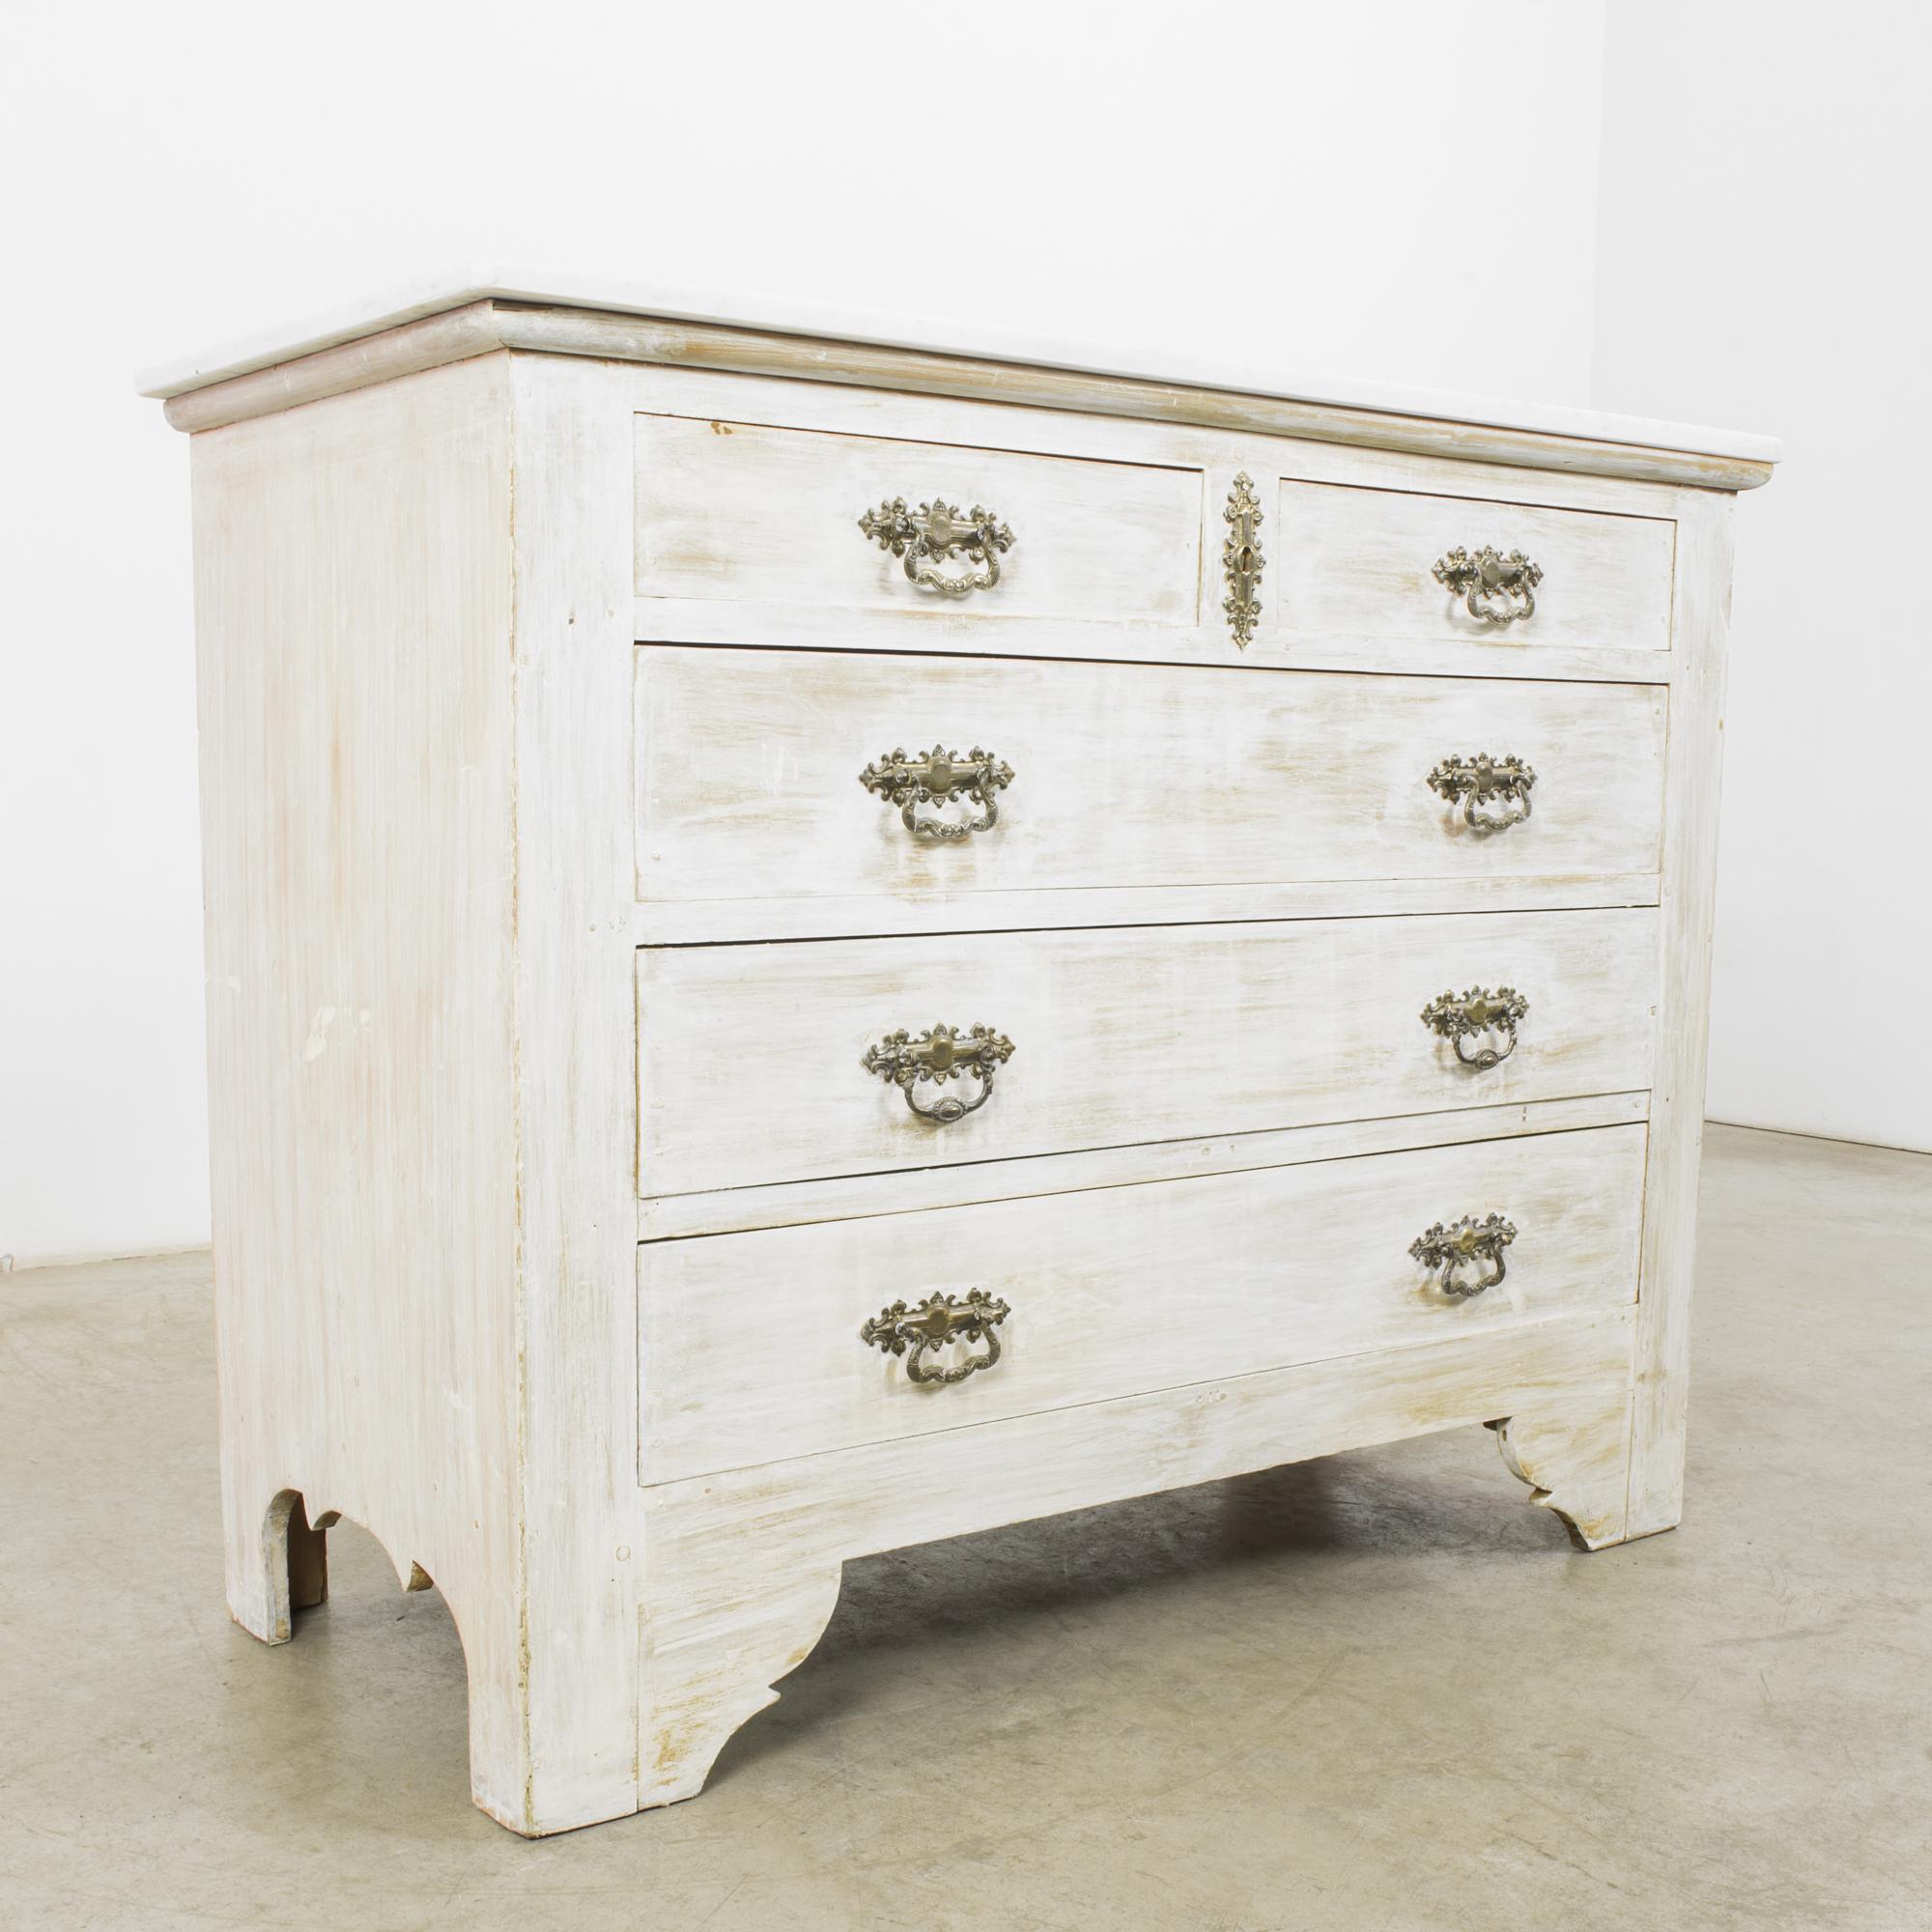 1880s French Provincial Marble Top Commode 3